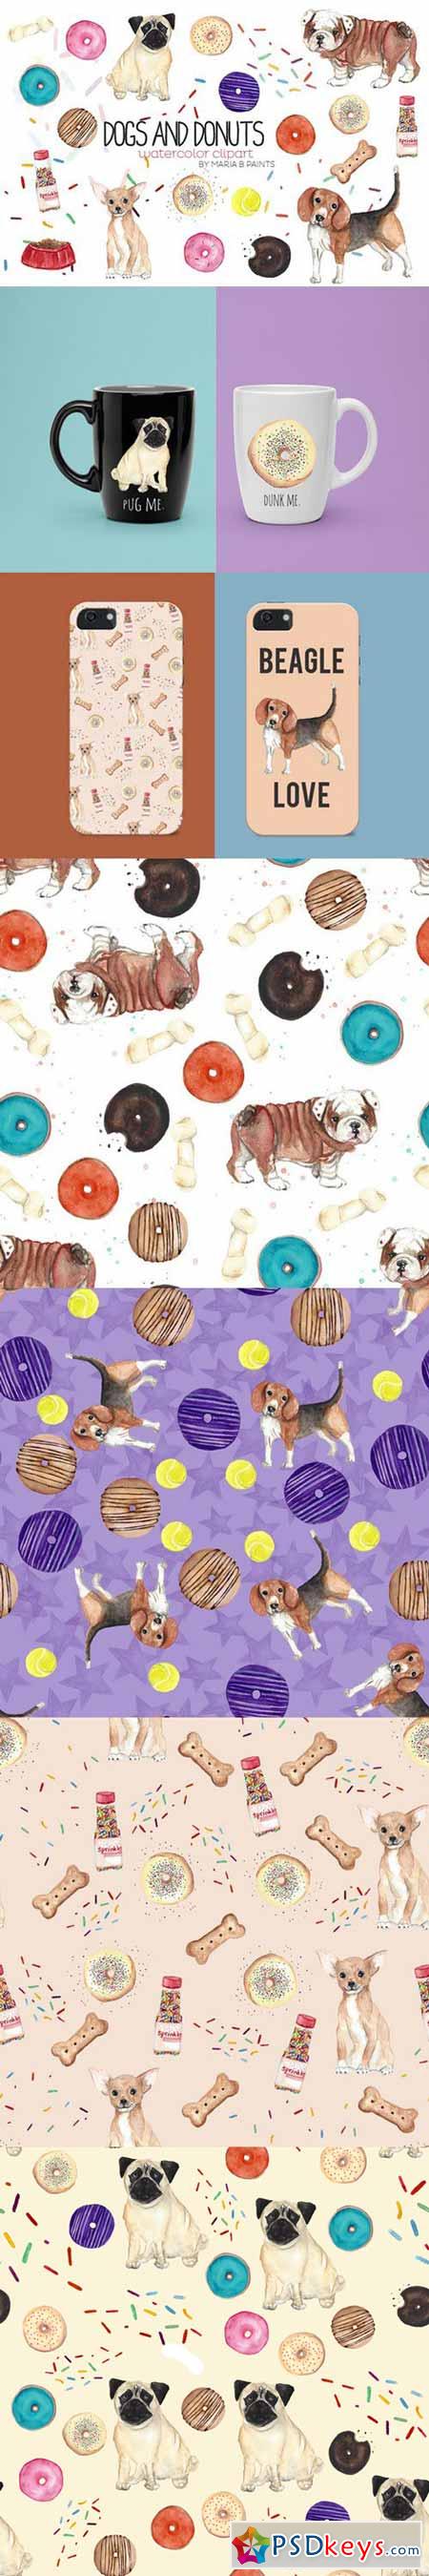 Watercolor Clip Art - Dogs n Donuts 415922